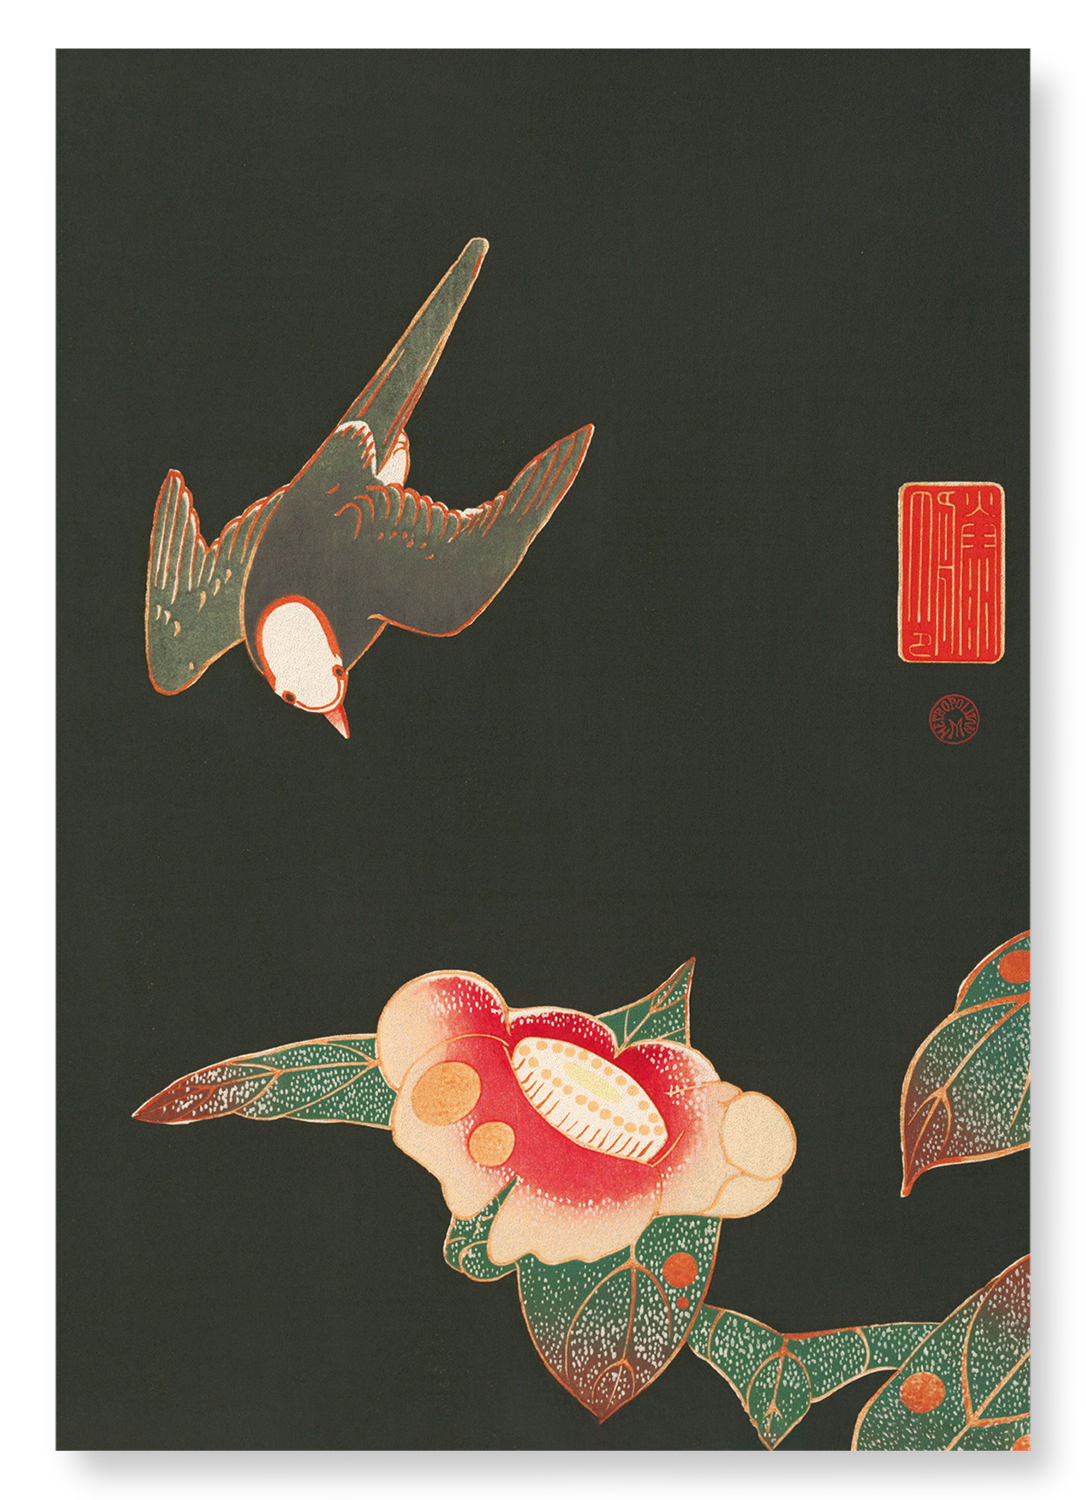 SWALLOW AND CAMELLIA (C.1900)